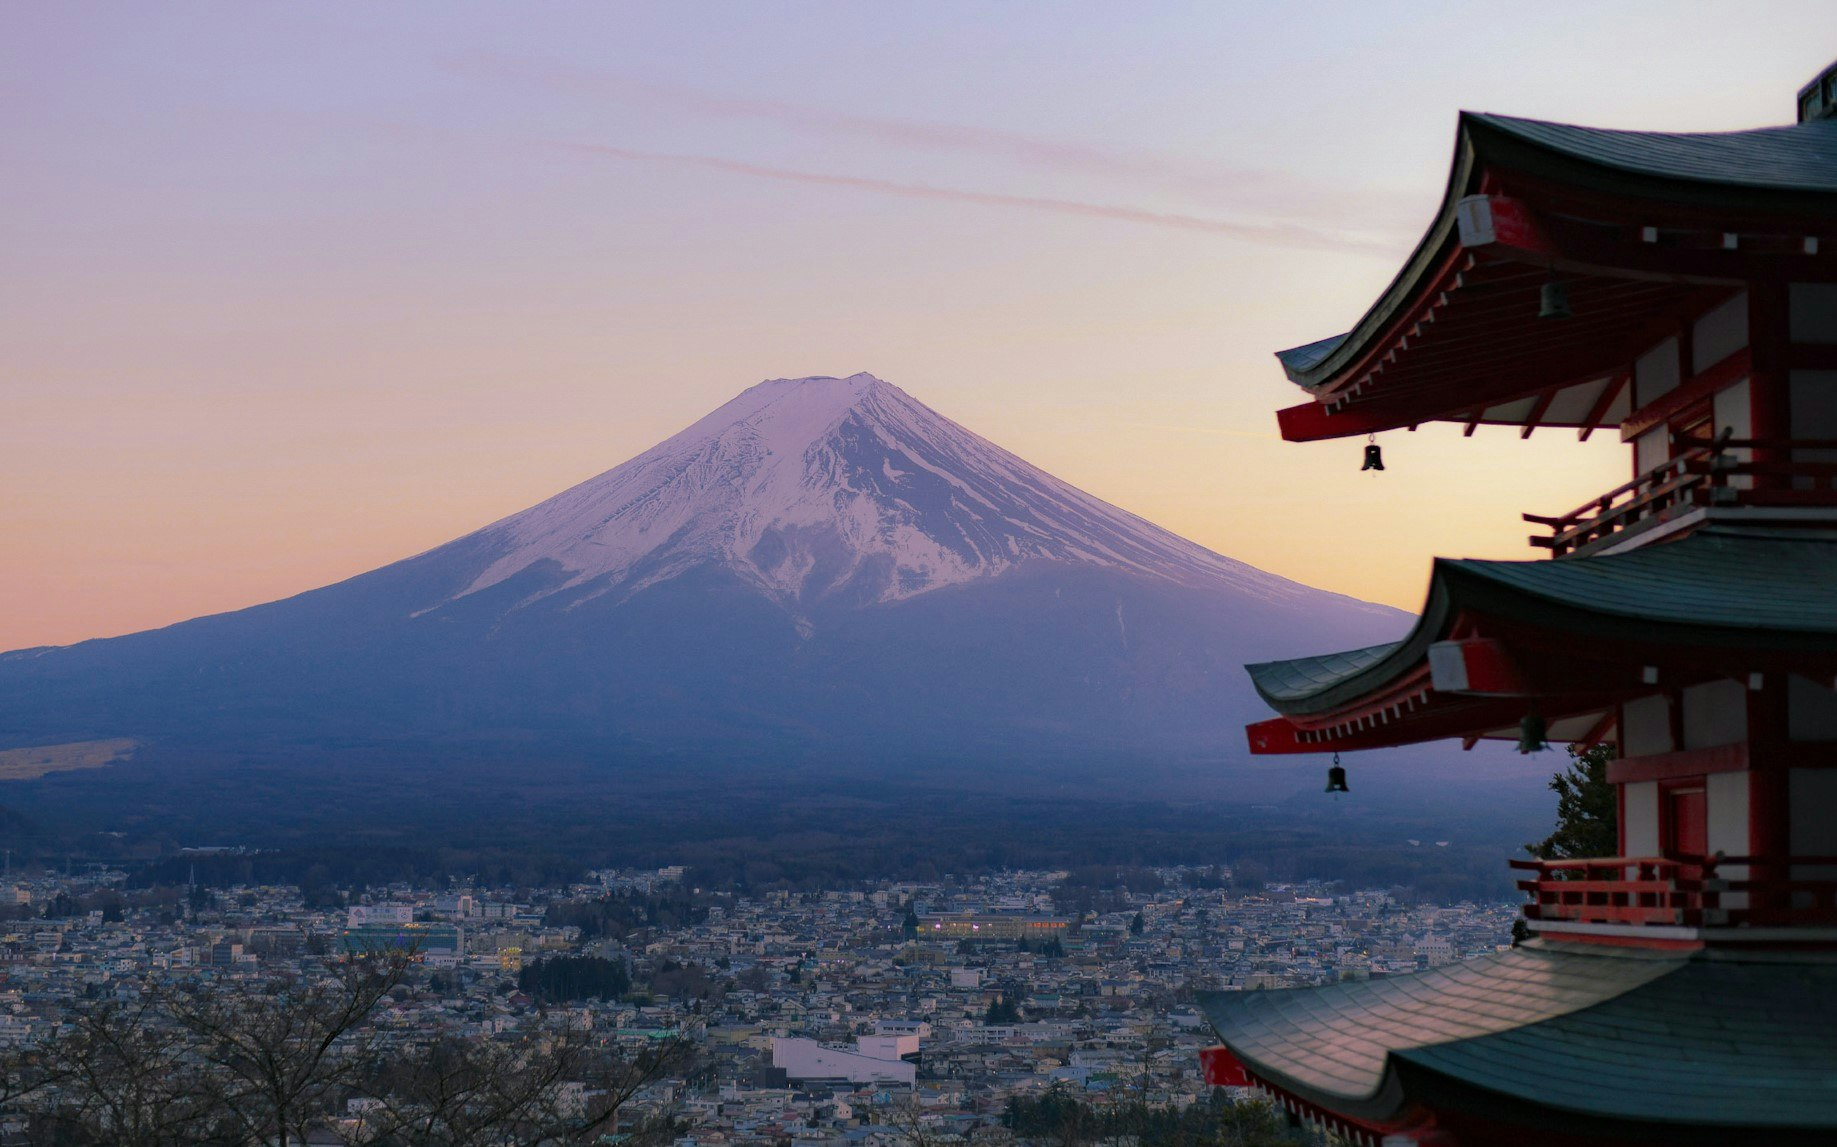 A landscape photograph of Mt Fuji from a distance. The mountain has been photographed at dusk and has a pink tint to it; a small town is visible in the shadow of the mountain. In the foreground a Japanese temple occupies the right side of the image.